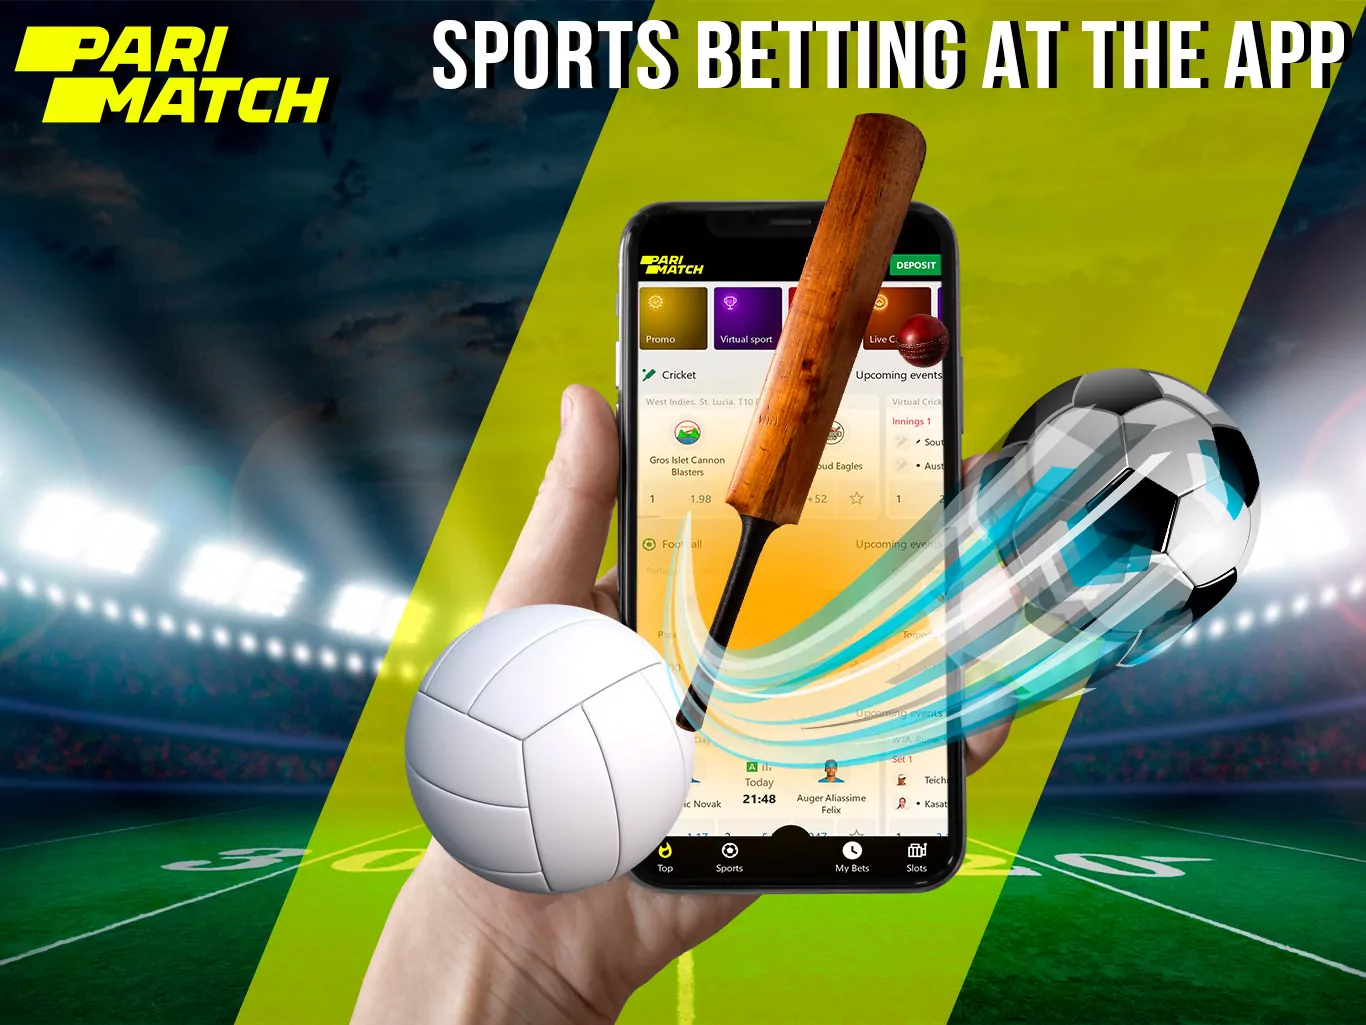 By placing bets on any of the proposed sports, you have a chance to win money at Parimatch.